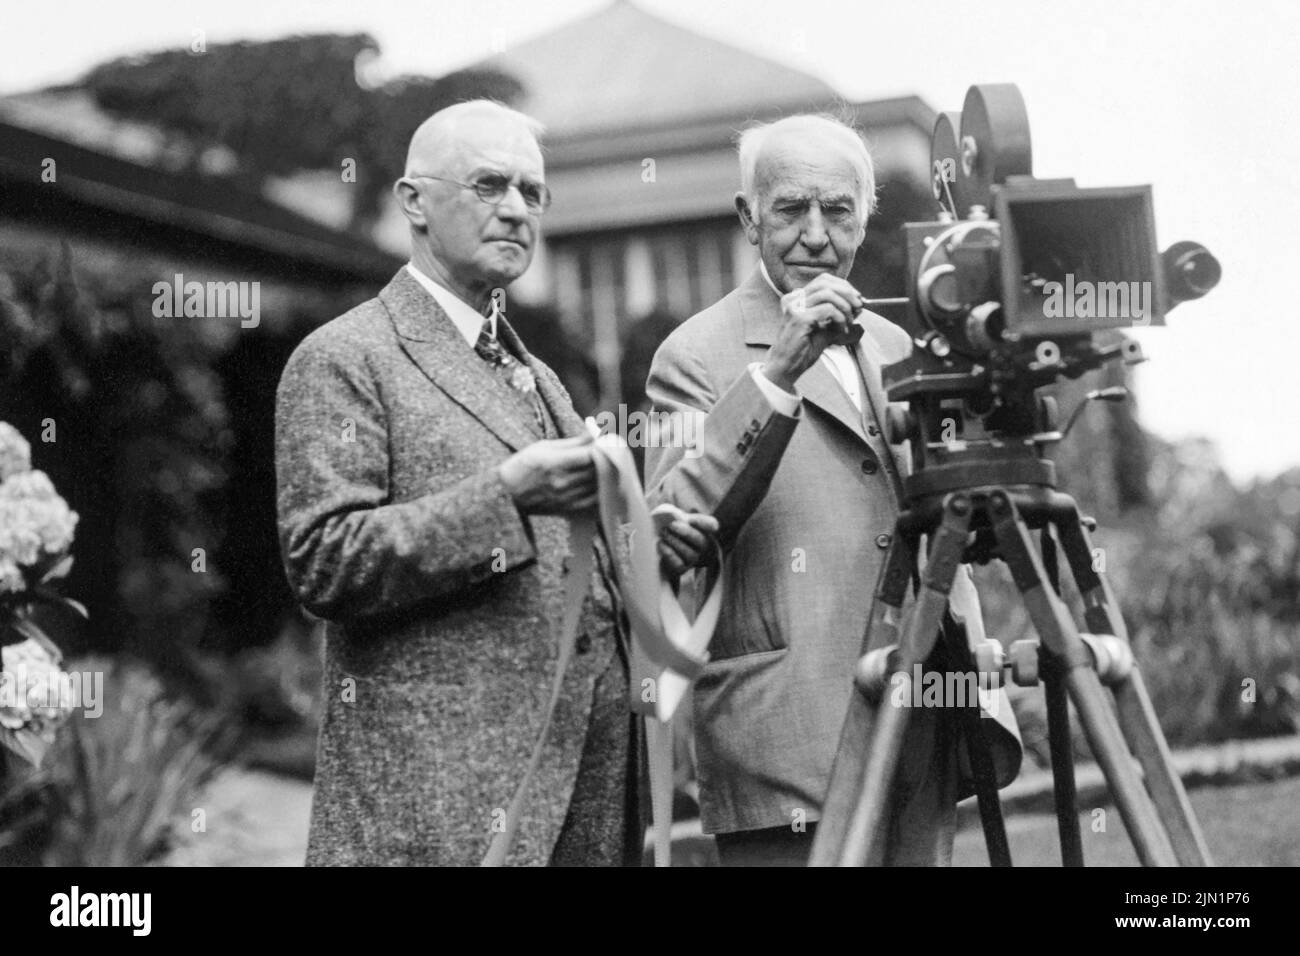 George Eastman (left) and Thomas Edison in July 1928, with motion picture camera at Eastman's house in Rochester, New York, where a demonstration of the new Kodacolor film was being held. (USA) Stock Photo